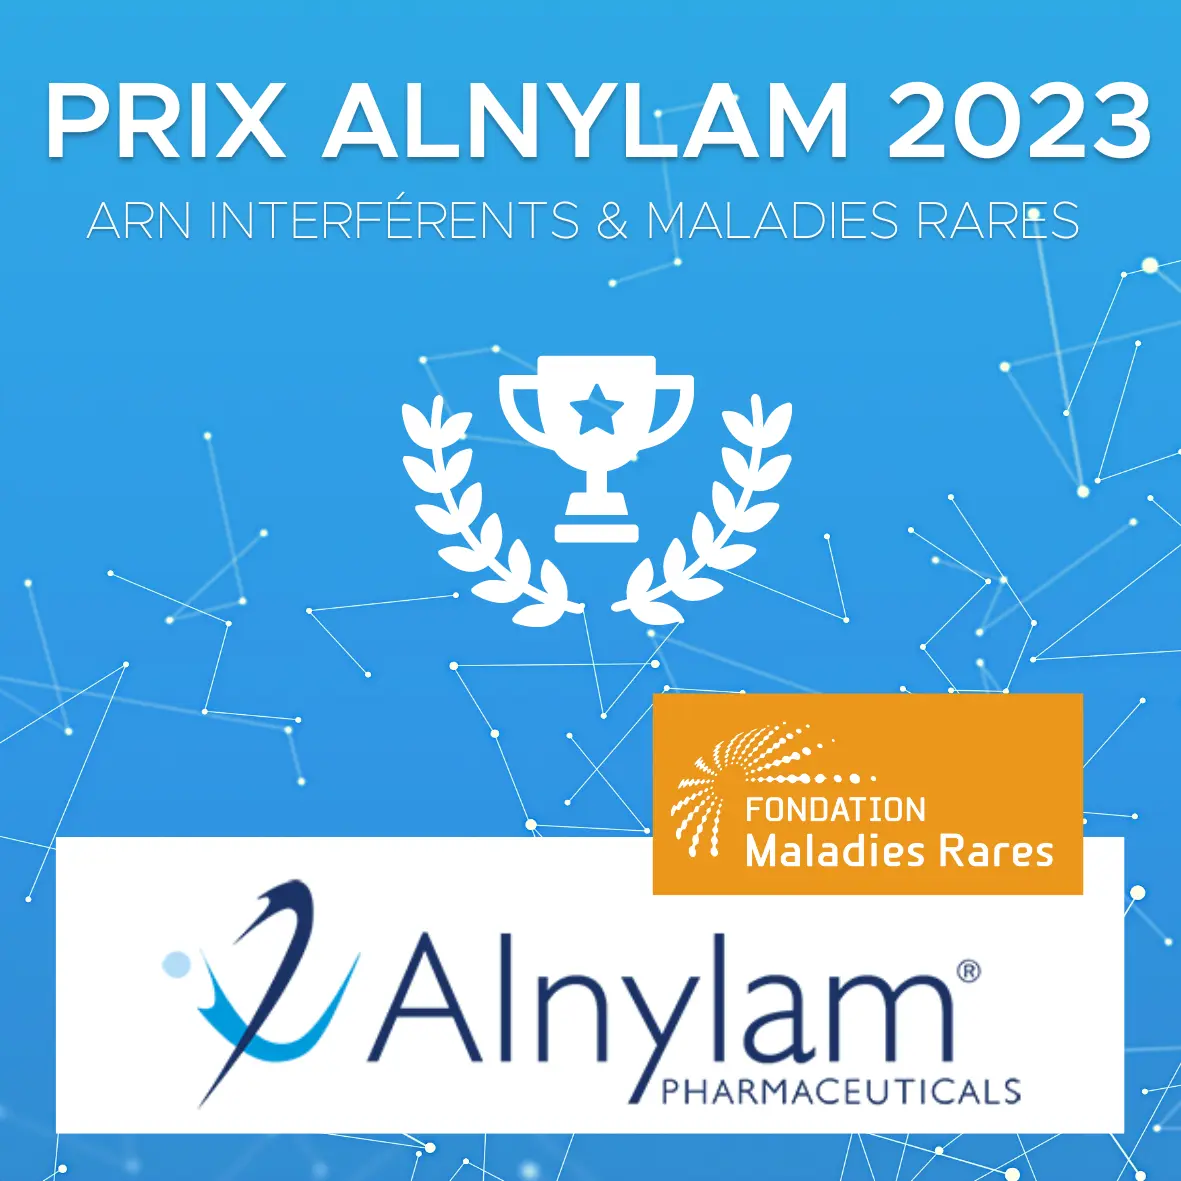 Alnylam 2023 Prize - &quot;RNA interference &amp; rare diseases